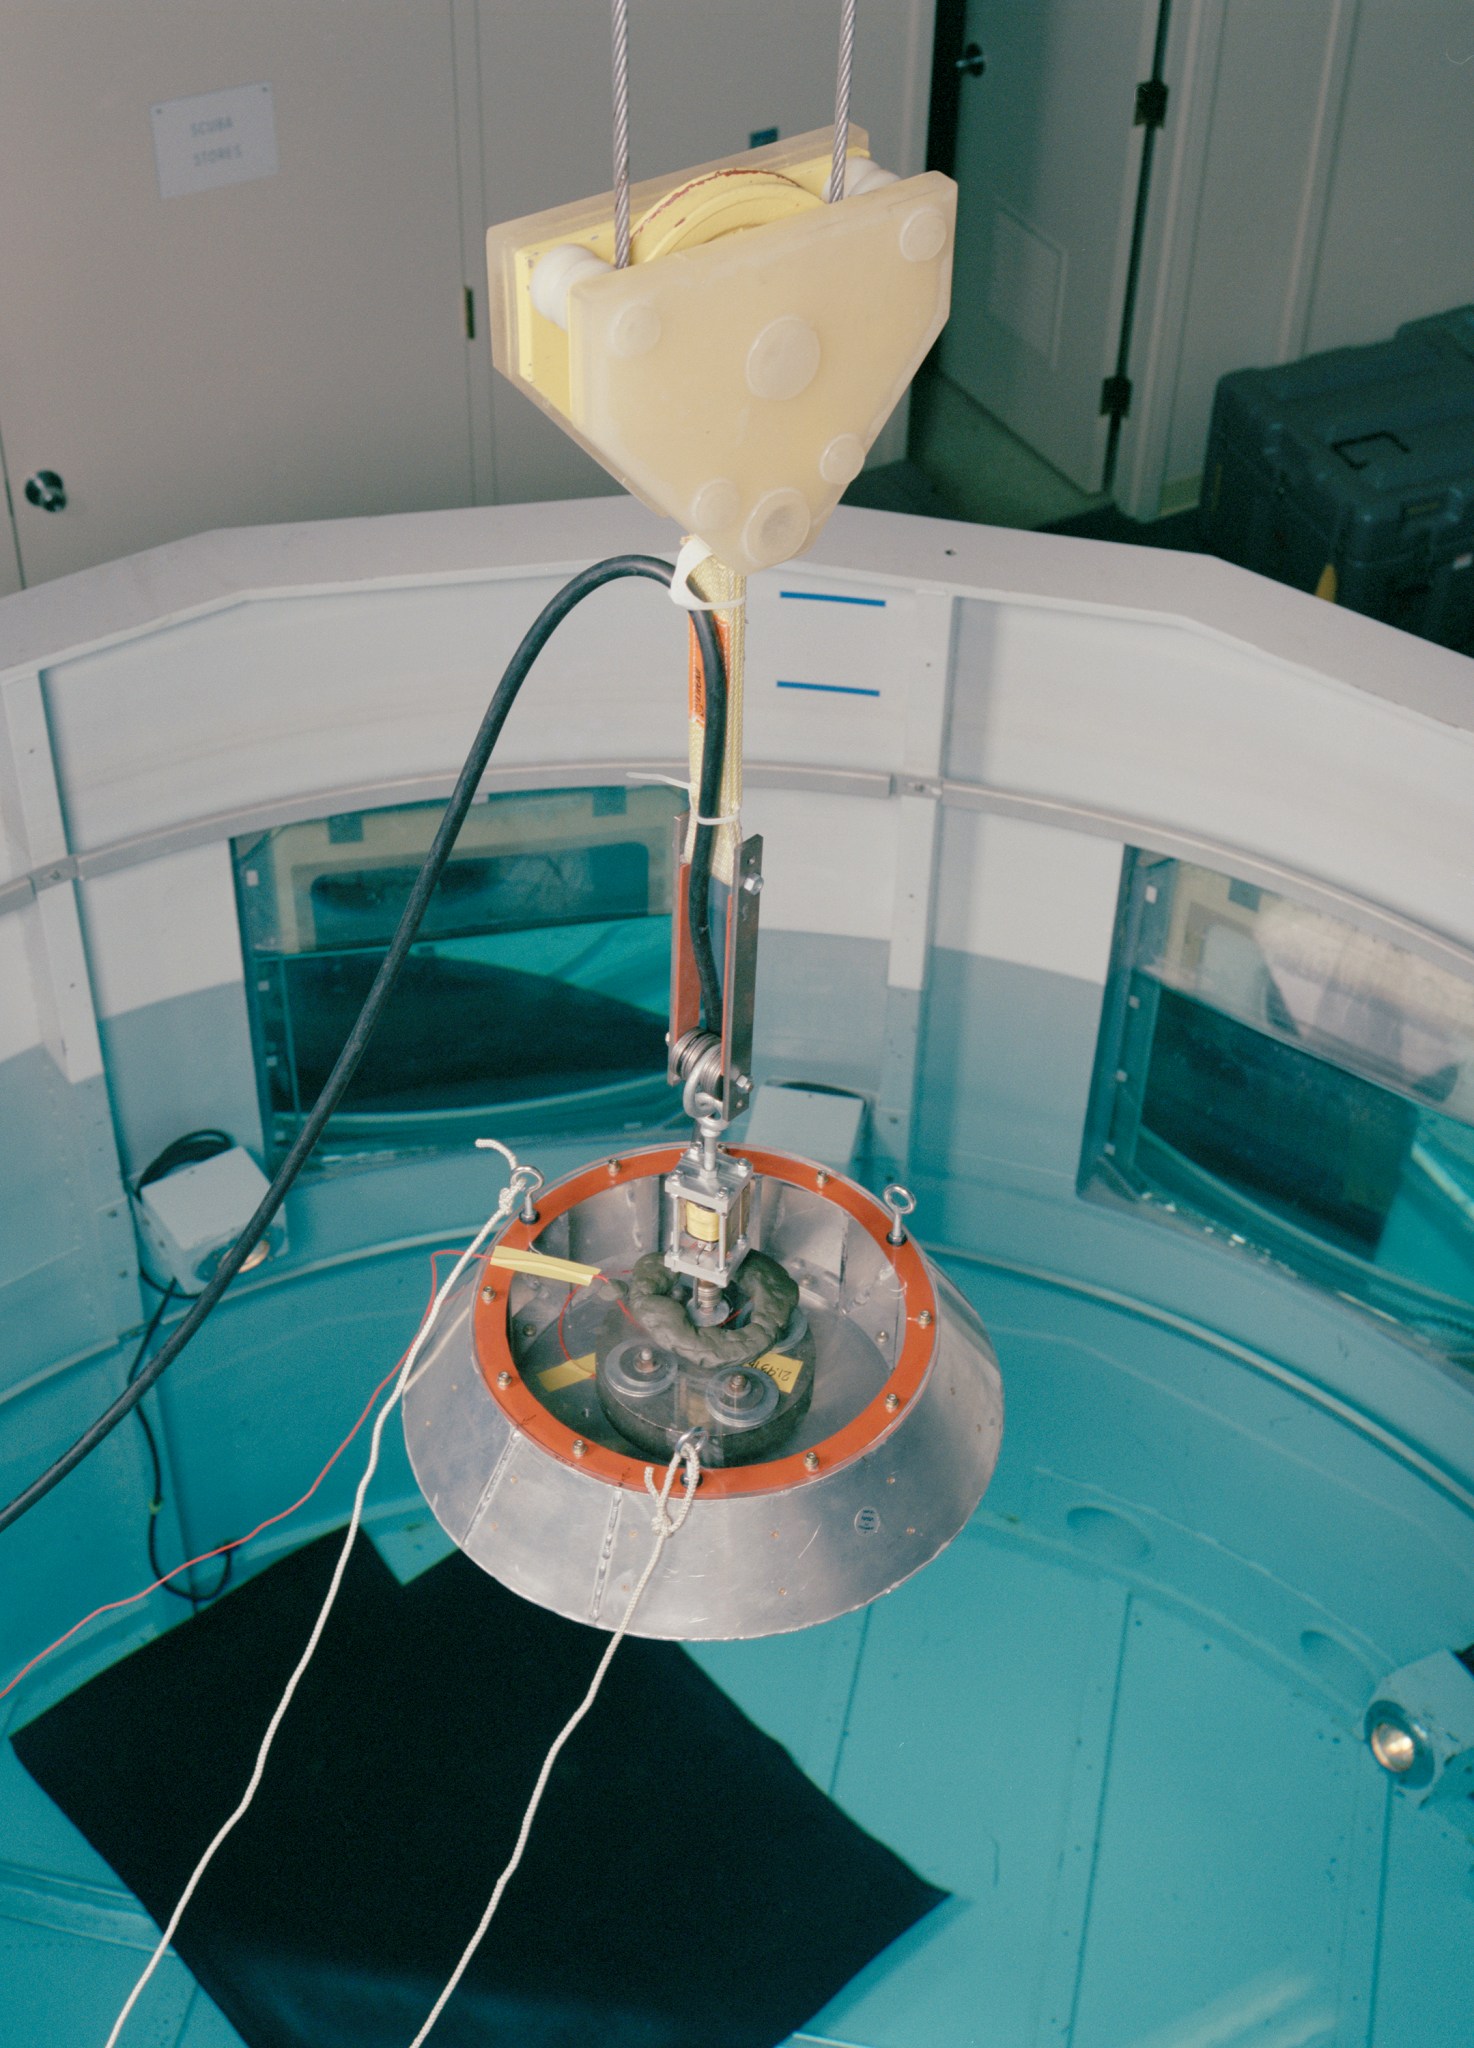 The Huygens probe going through testing in a neutral buoyancy pool at NASA’s Ames Research Center in Silicon Valley.